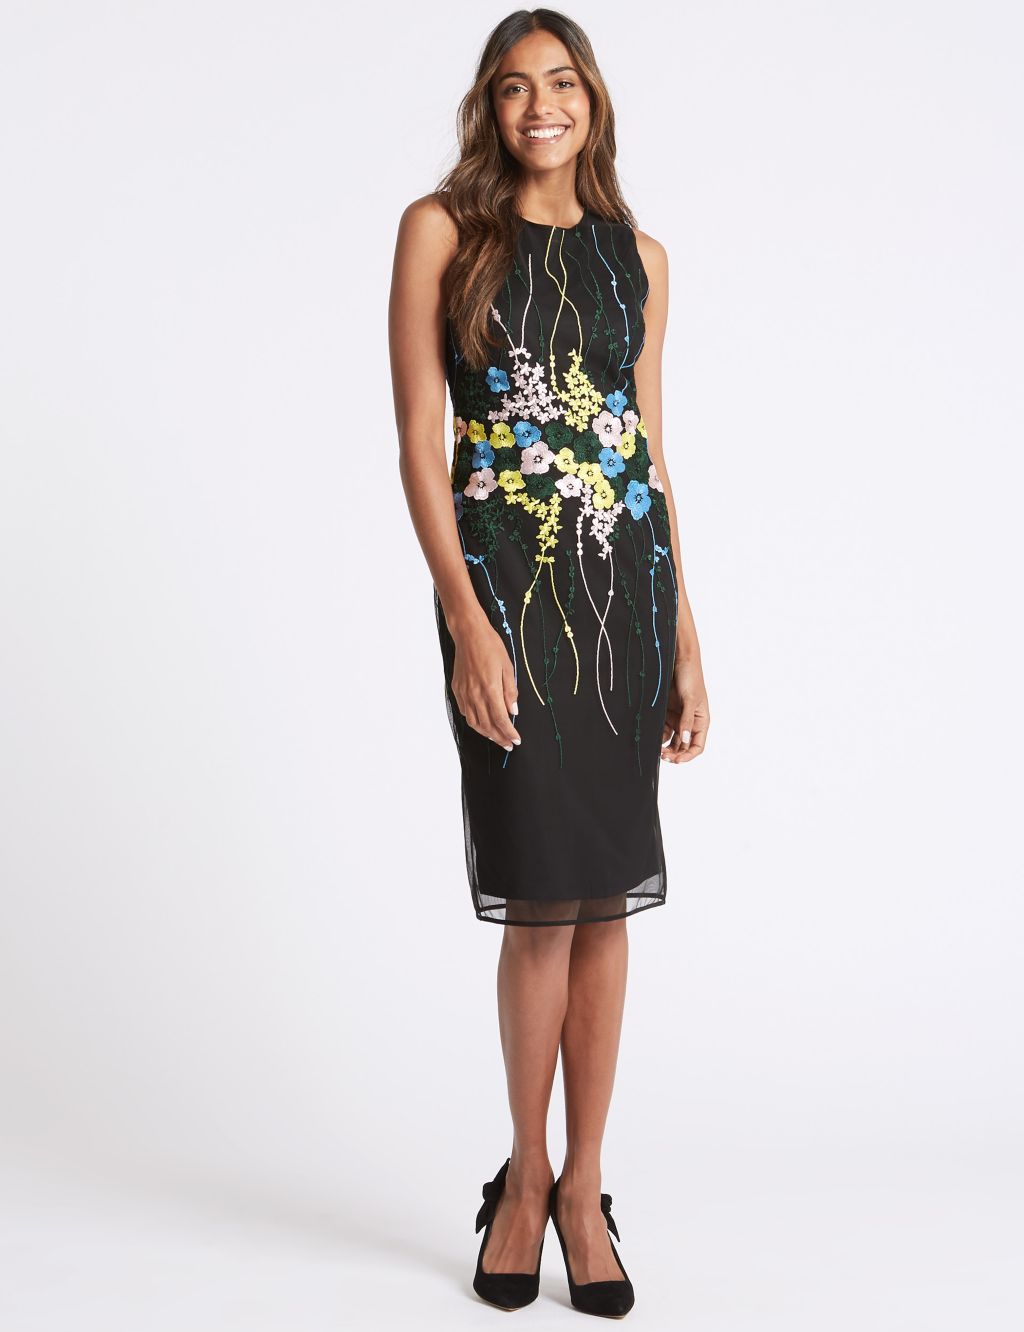 Floral Embroidered Bodycon Dress | M&S Collection | M&S